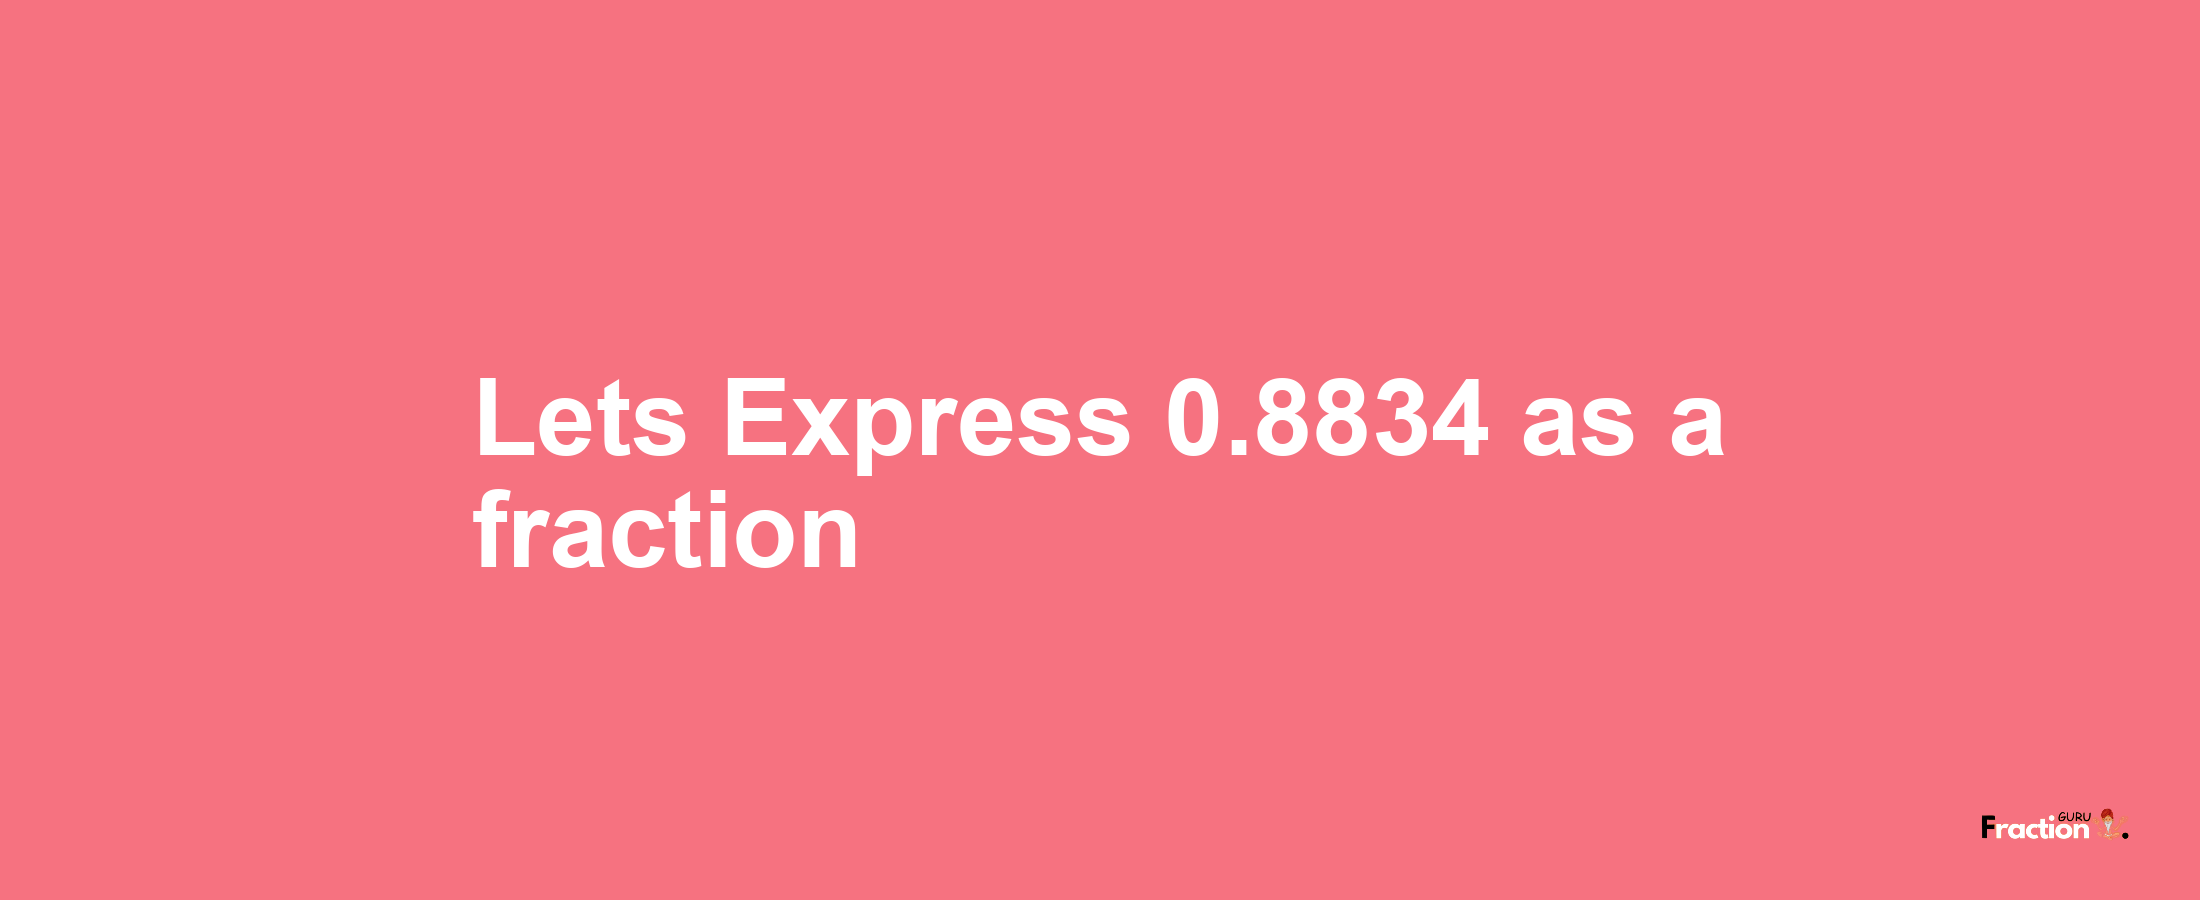 Lets Express 0.8834 as afraction